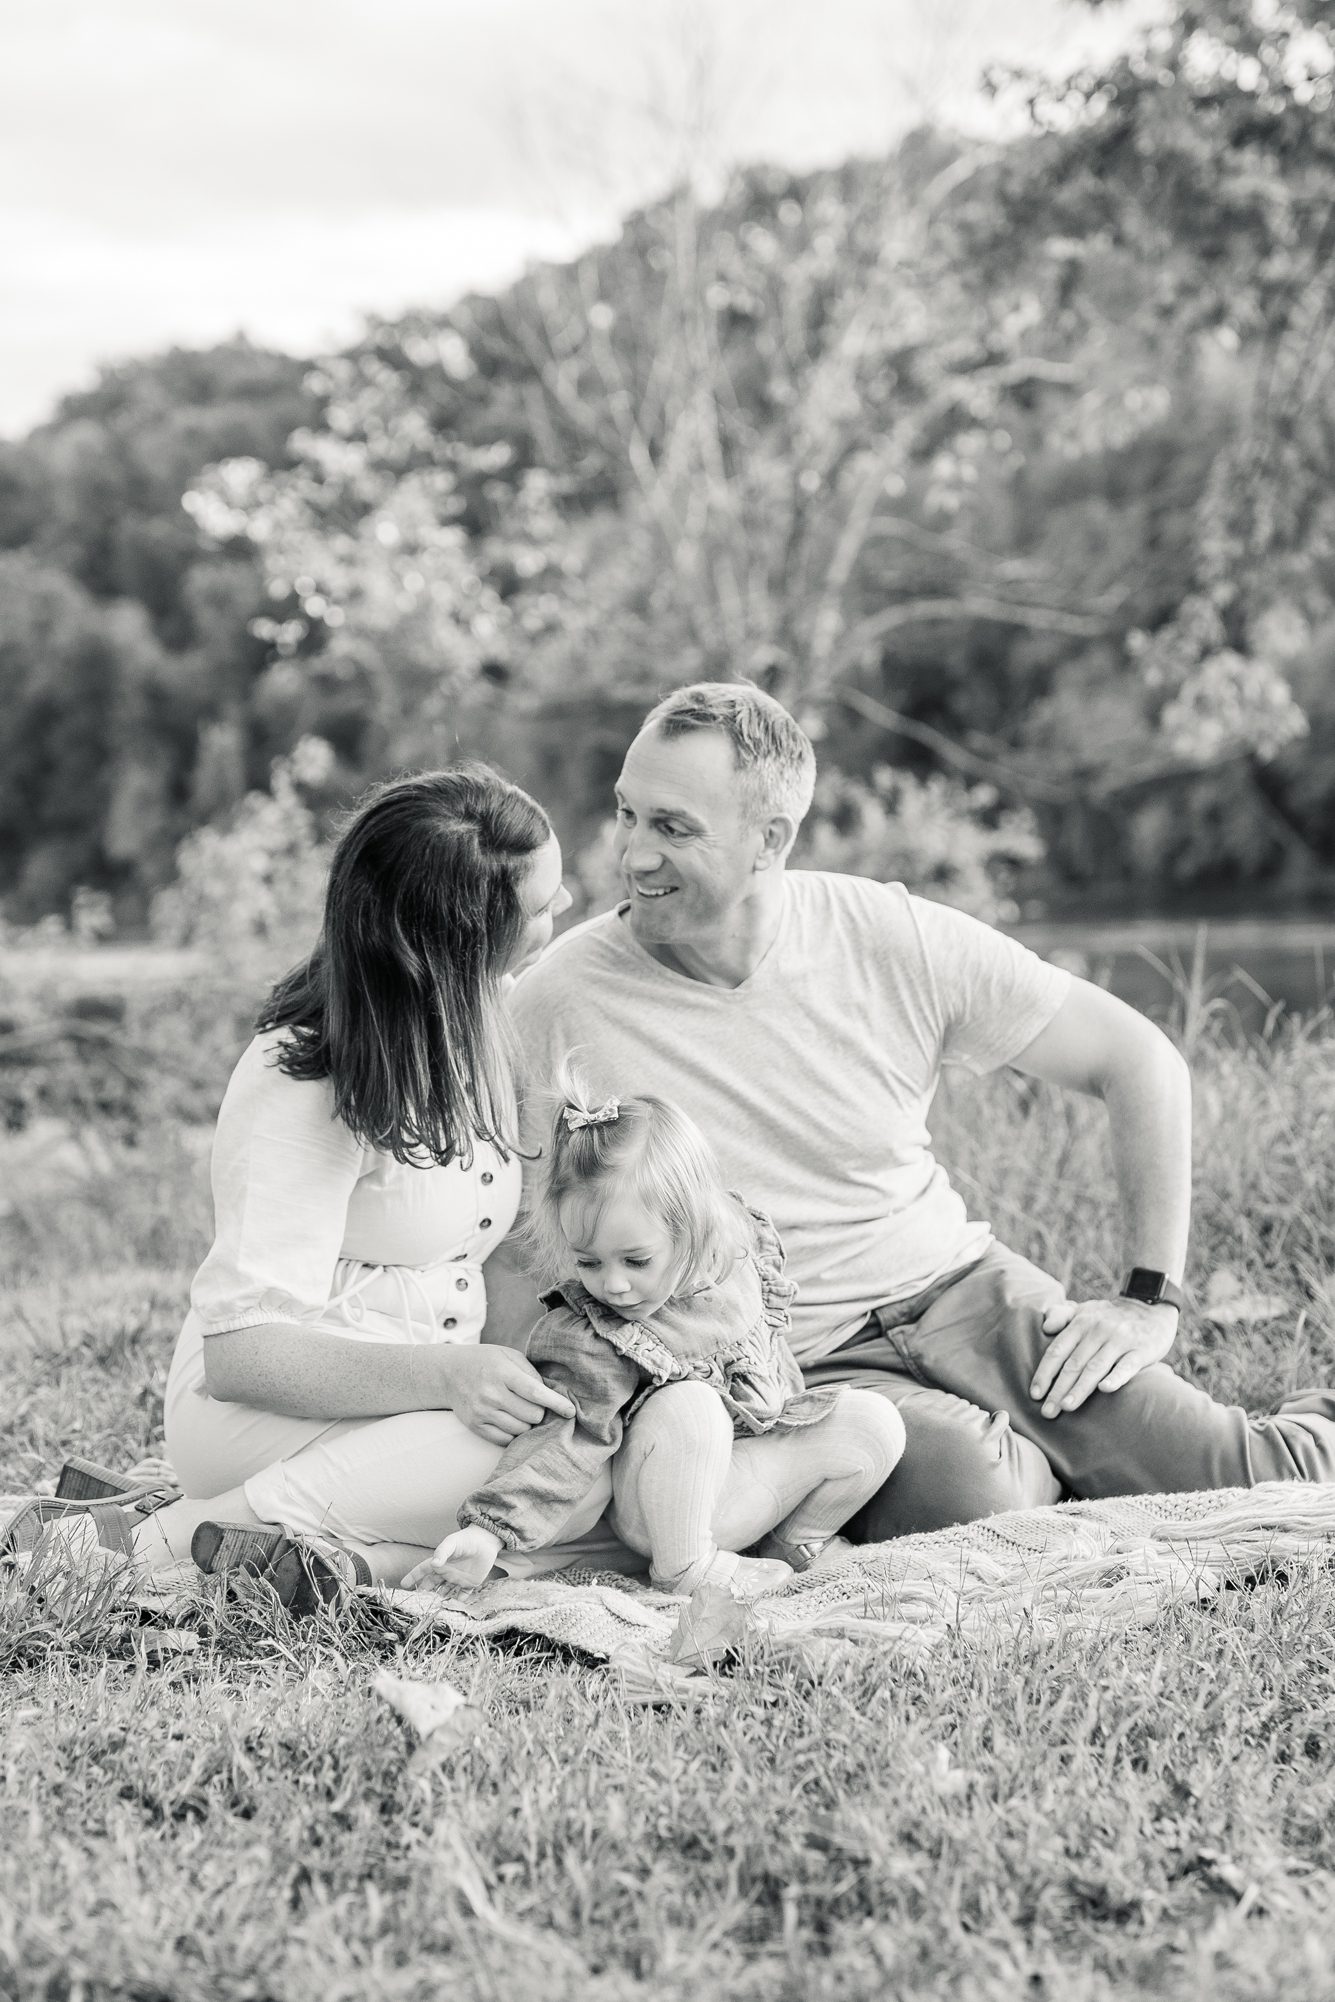 Black and white image of parents smiling at each other while toddler plays. Photo by LRG Portraits.